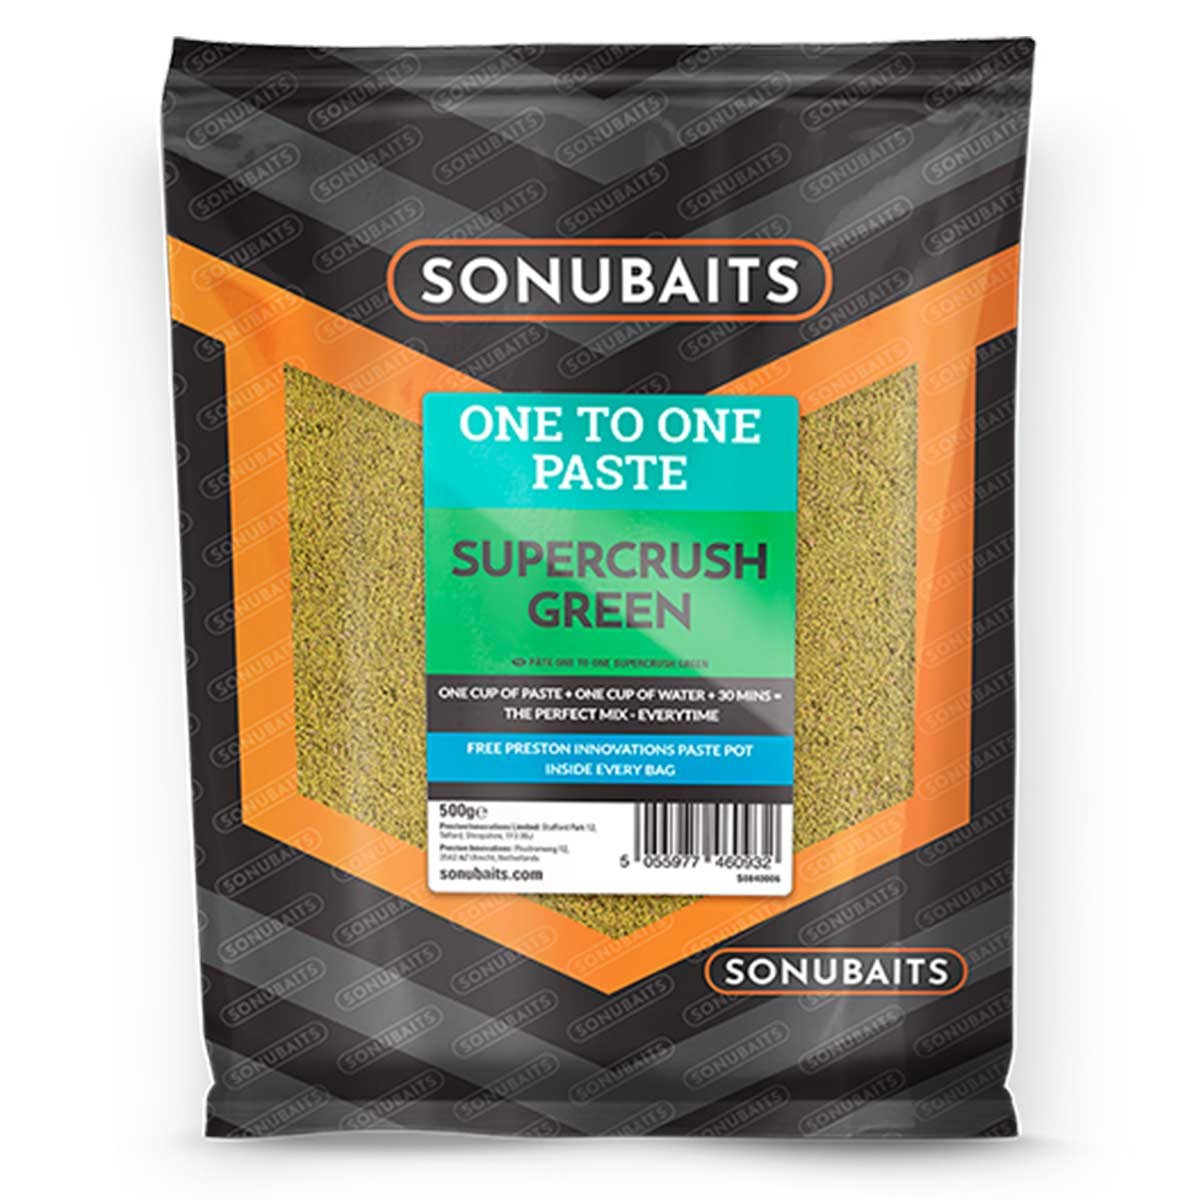 Sonubaits Supercruch Green One To One Paste